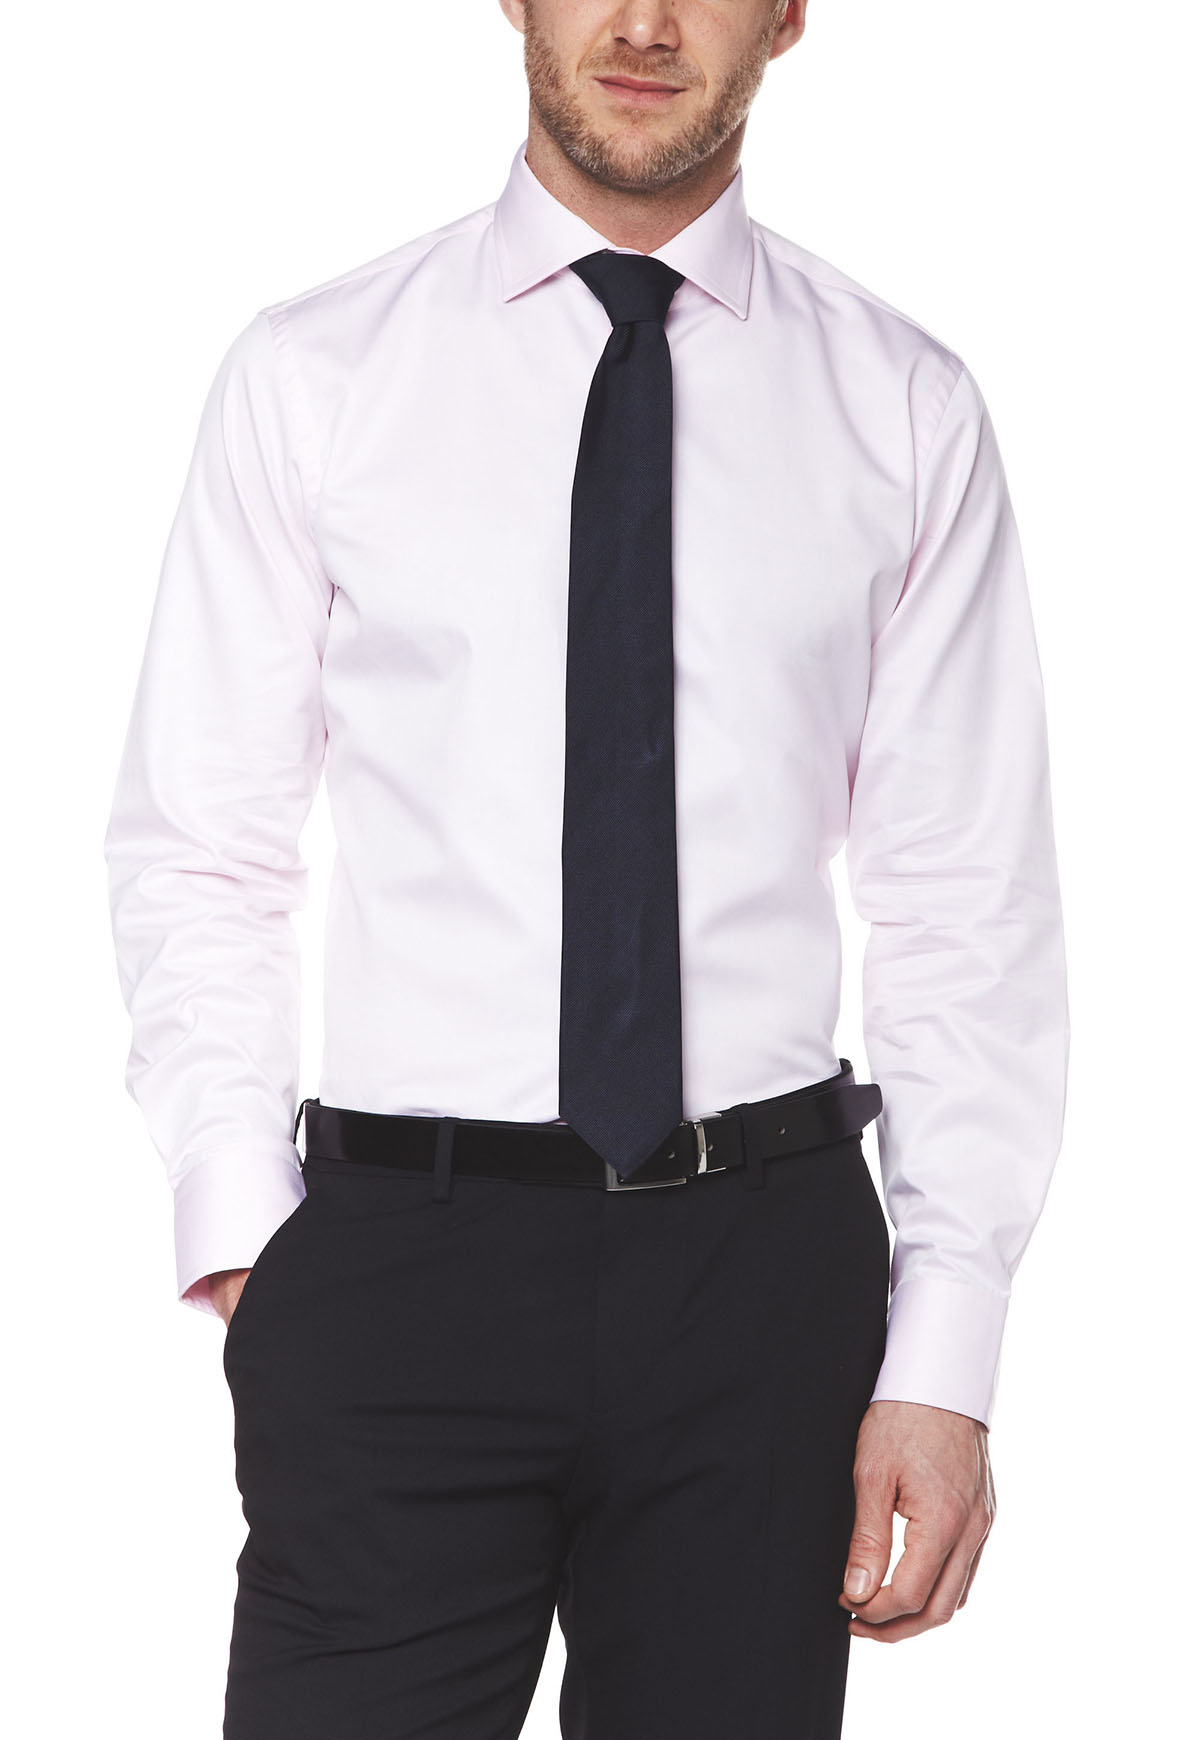 chemise-homme-manches-longues-coupe-ajustee-col-napoli-twill-rose-clair-uni-coton-face-alain-figaret-an0580006782.jpg